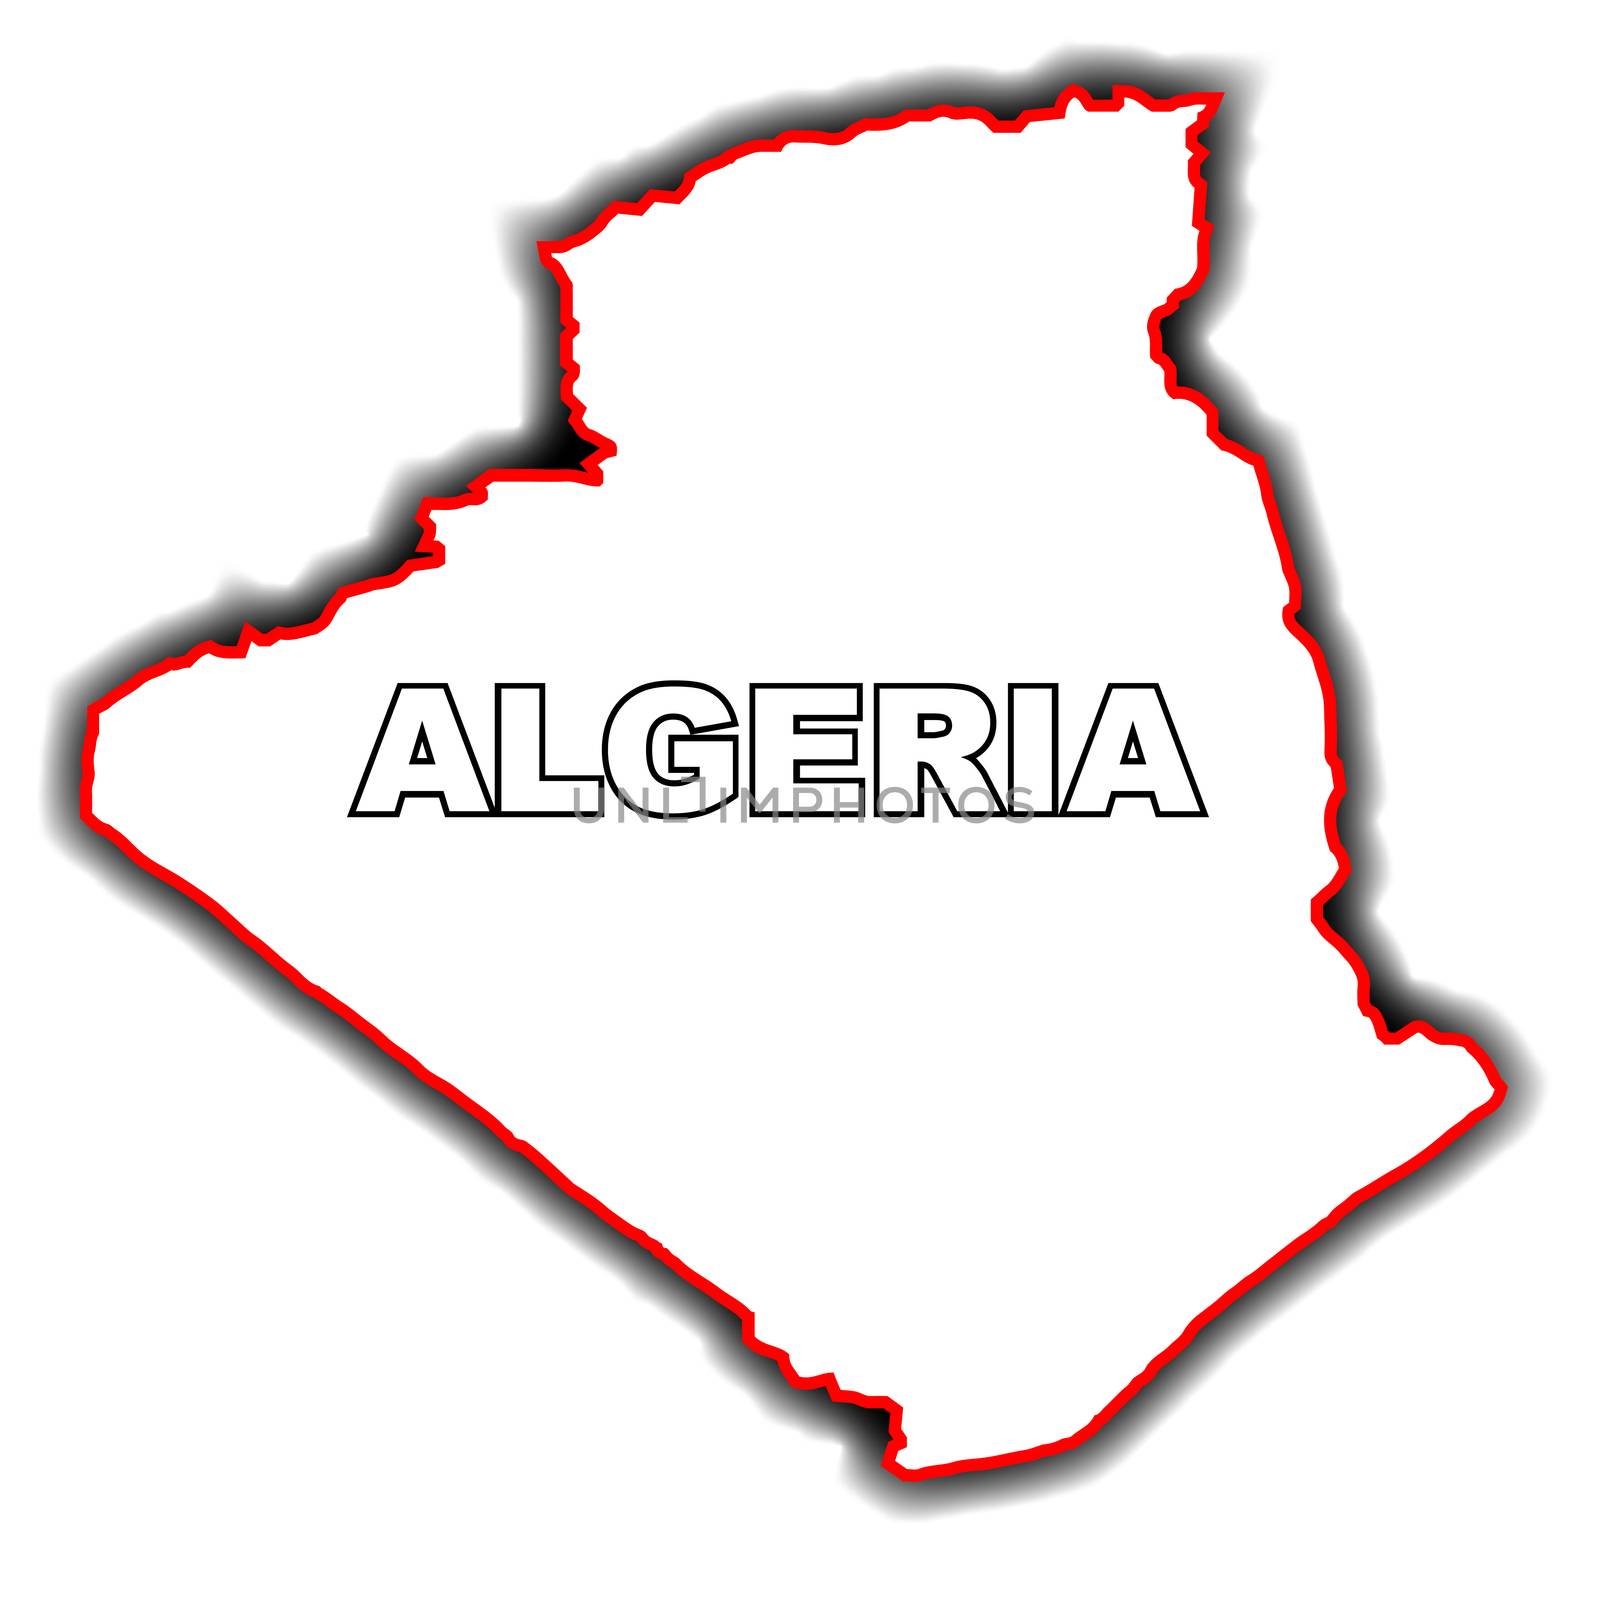 Outline map of the Arab League country of Algeria